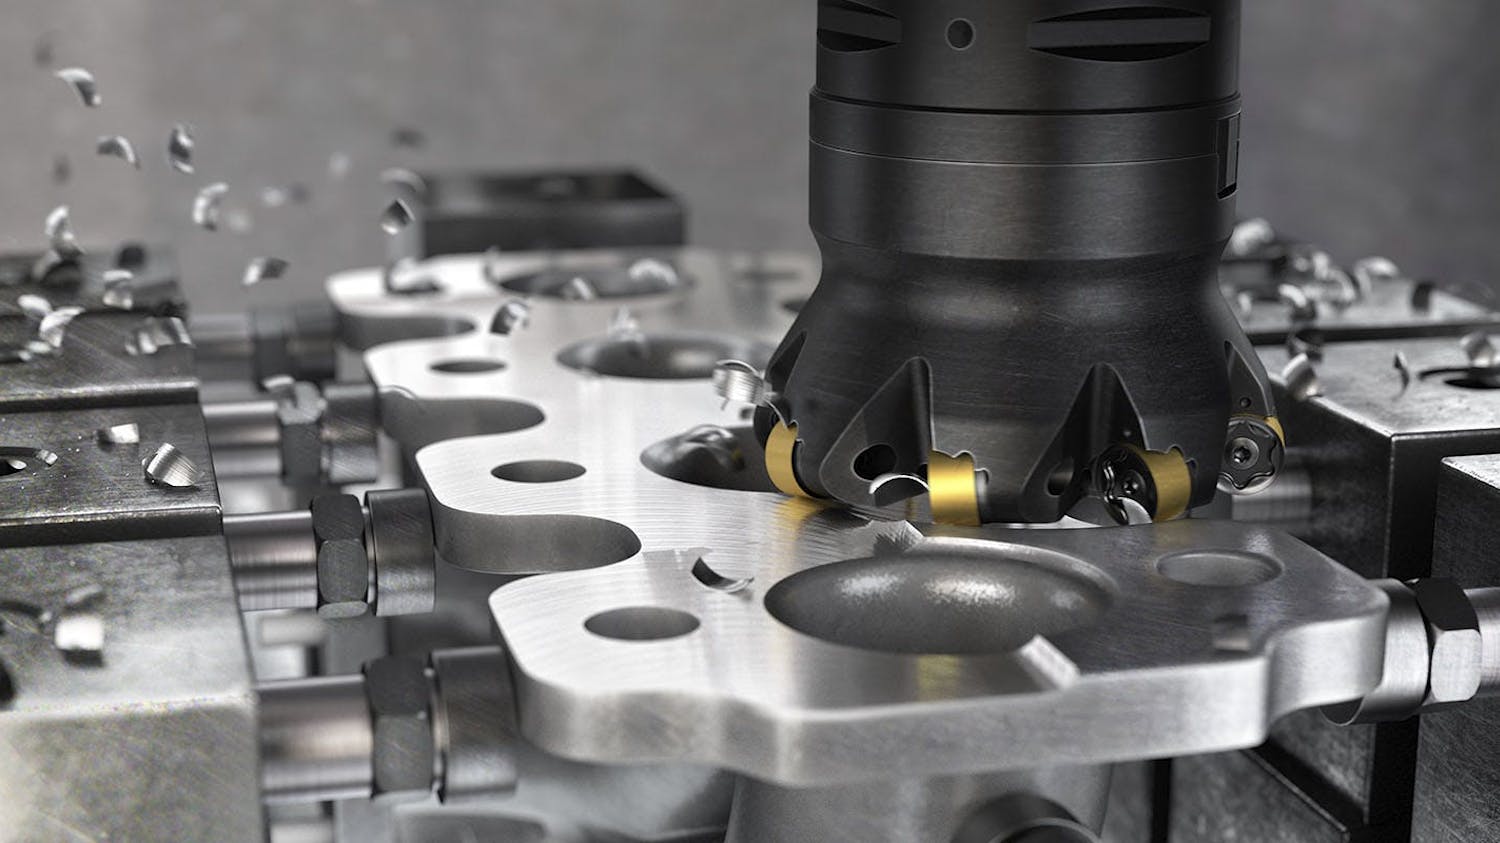 Sandvik Coromant&rsquo;s CoroMill MR80 is versatile milling concept that offers higher productivity and economical machining in a range of operations, with no compromise on security.